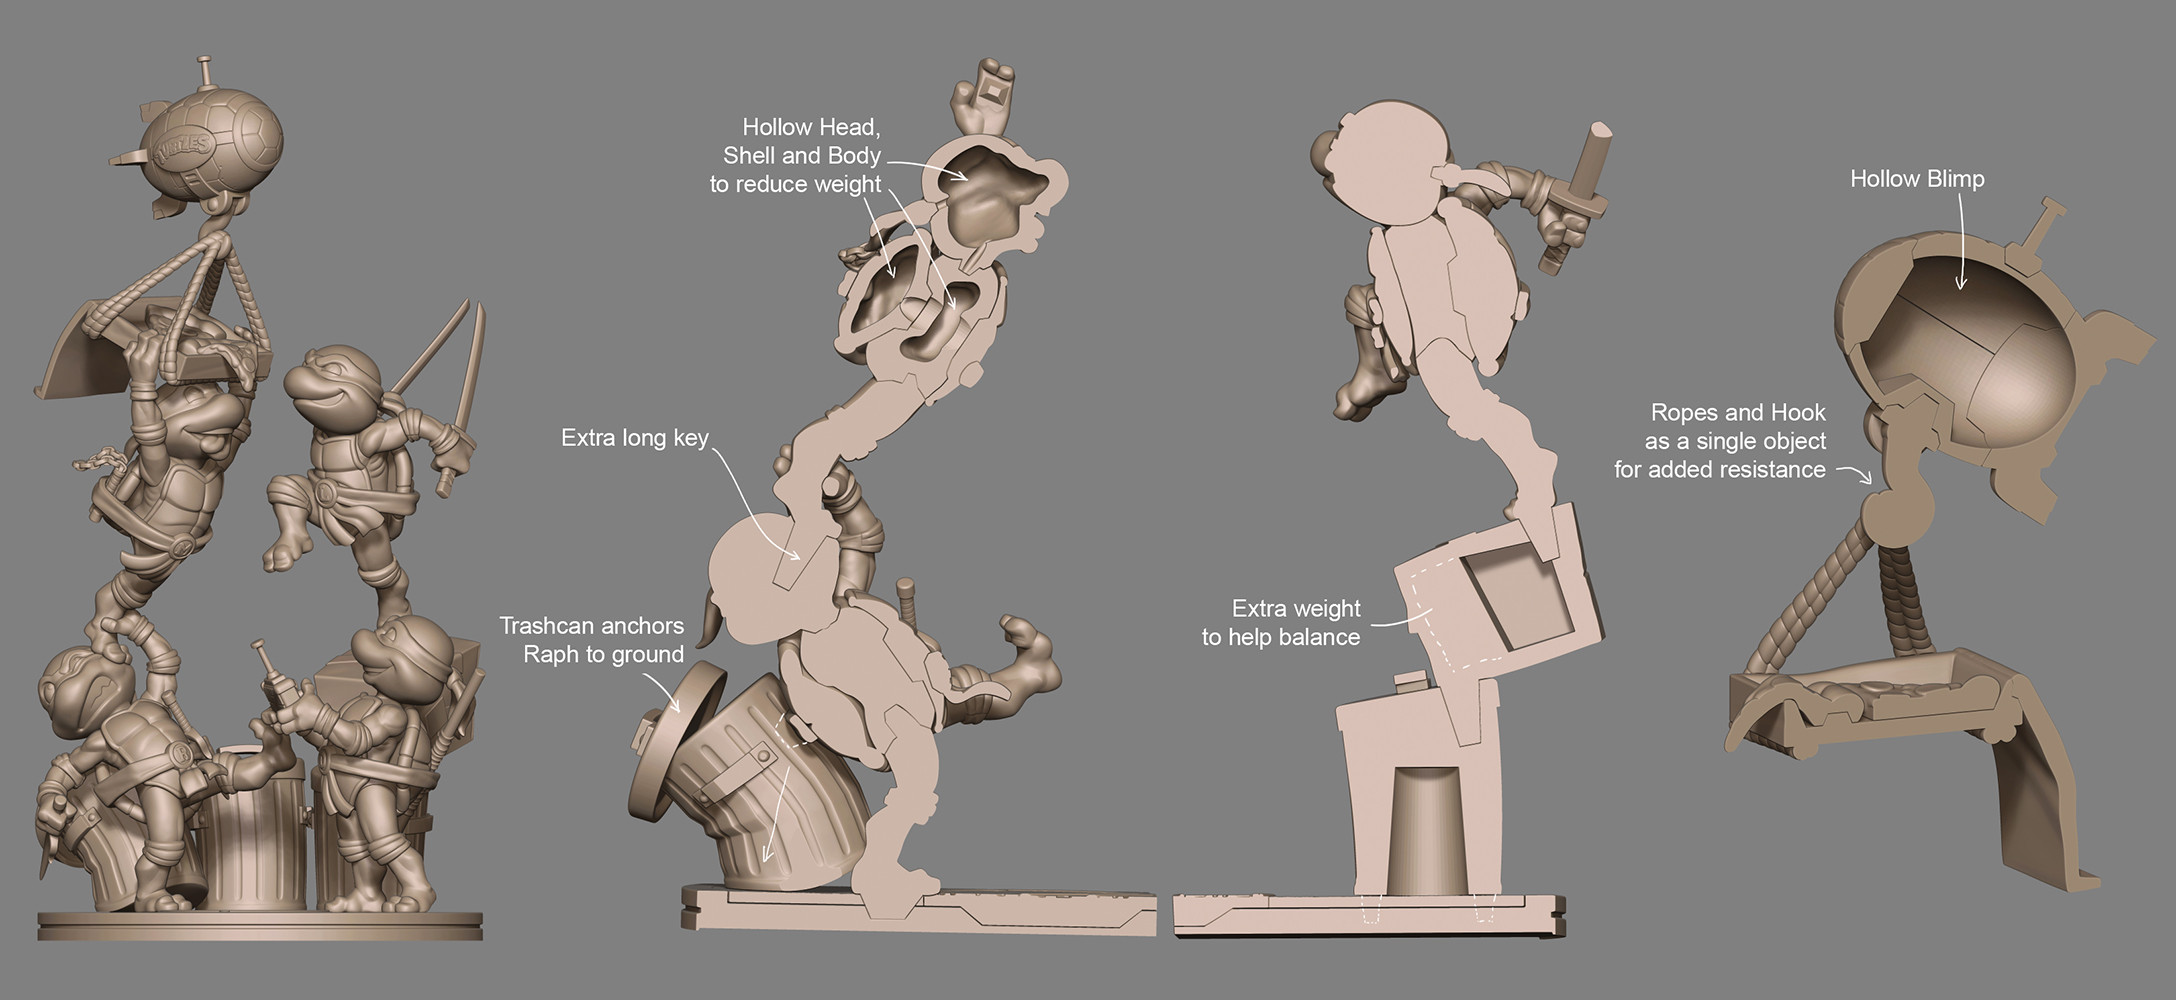 Some tricks to balance the piece while making it look unbalanced and dynamic :)